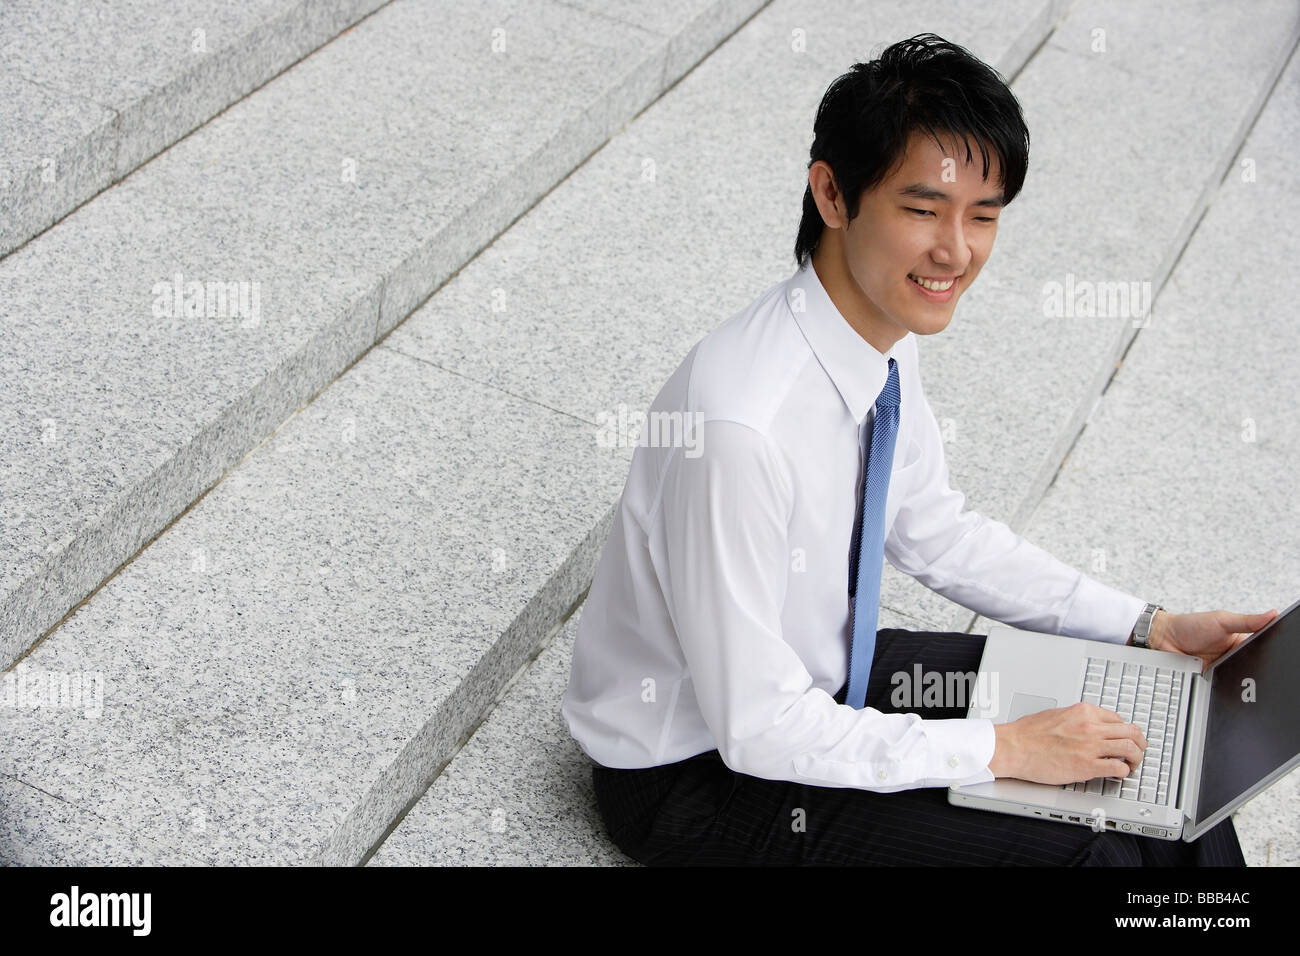 Businessman sitting on steps ans working on laptop Stock Photo